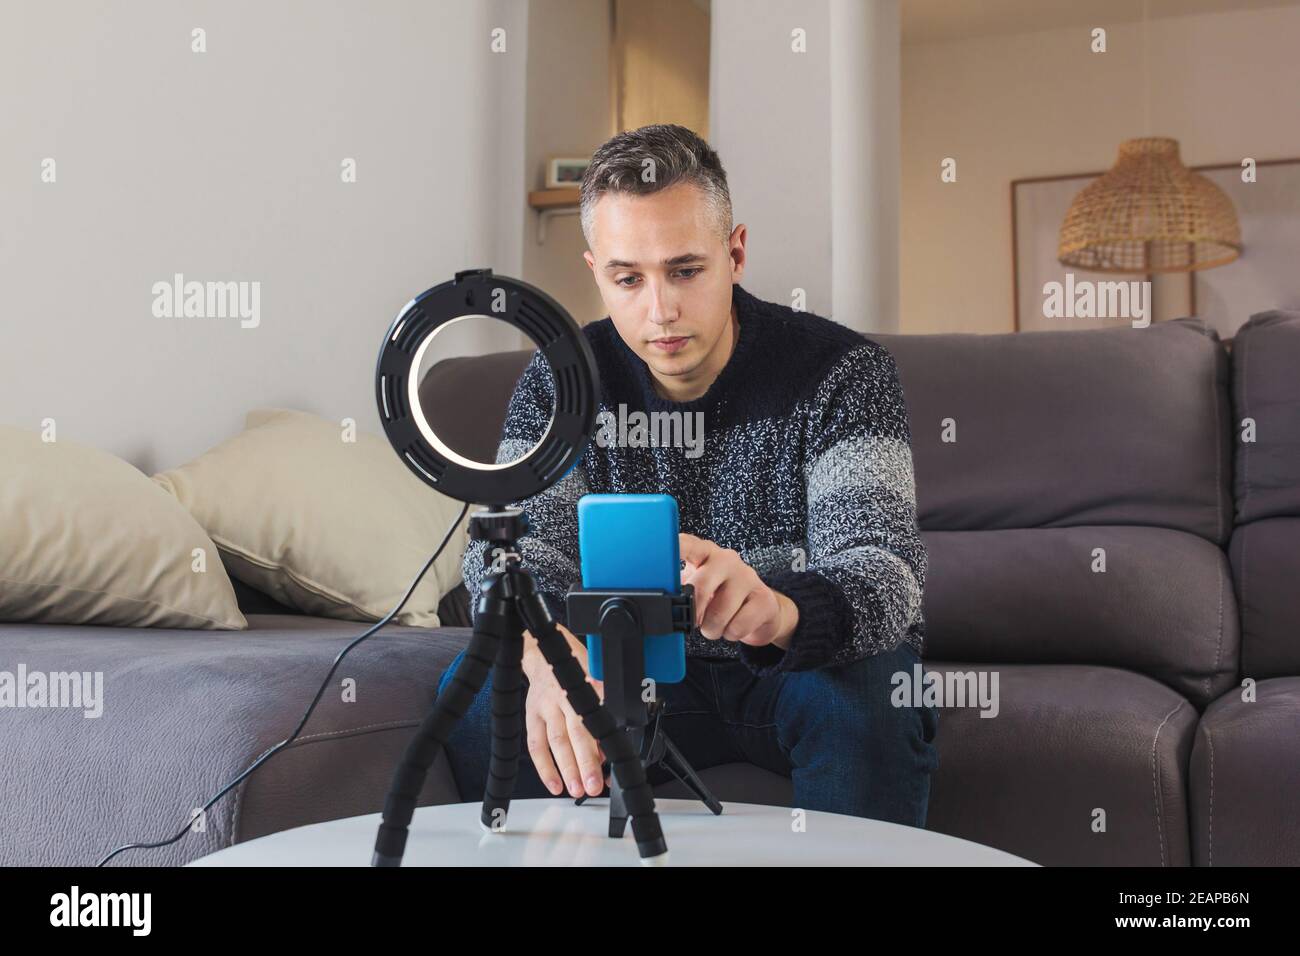 Stock photo of Young man millennial influencer sit on sofa preparing a setup with mobile phone and lighting for vlogging or video call. Social media v Stock Photo